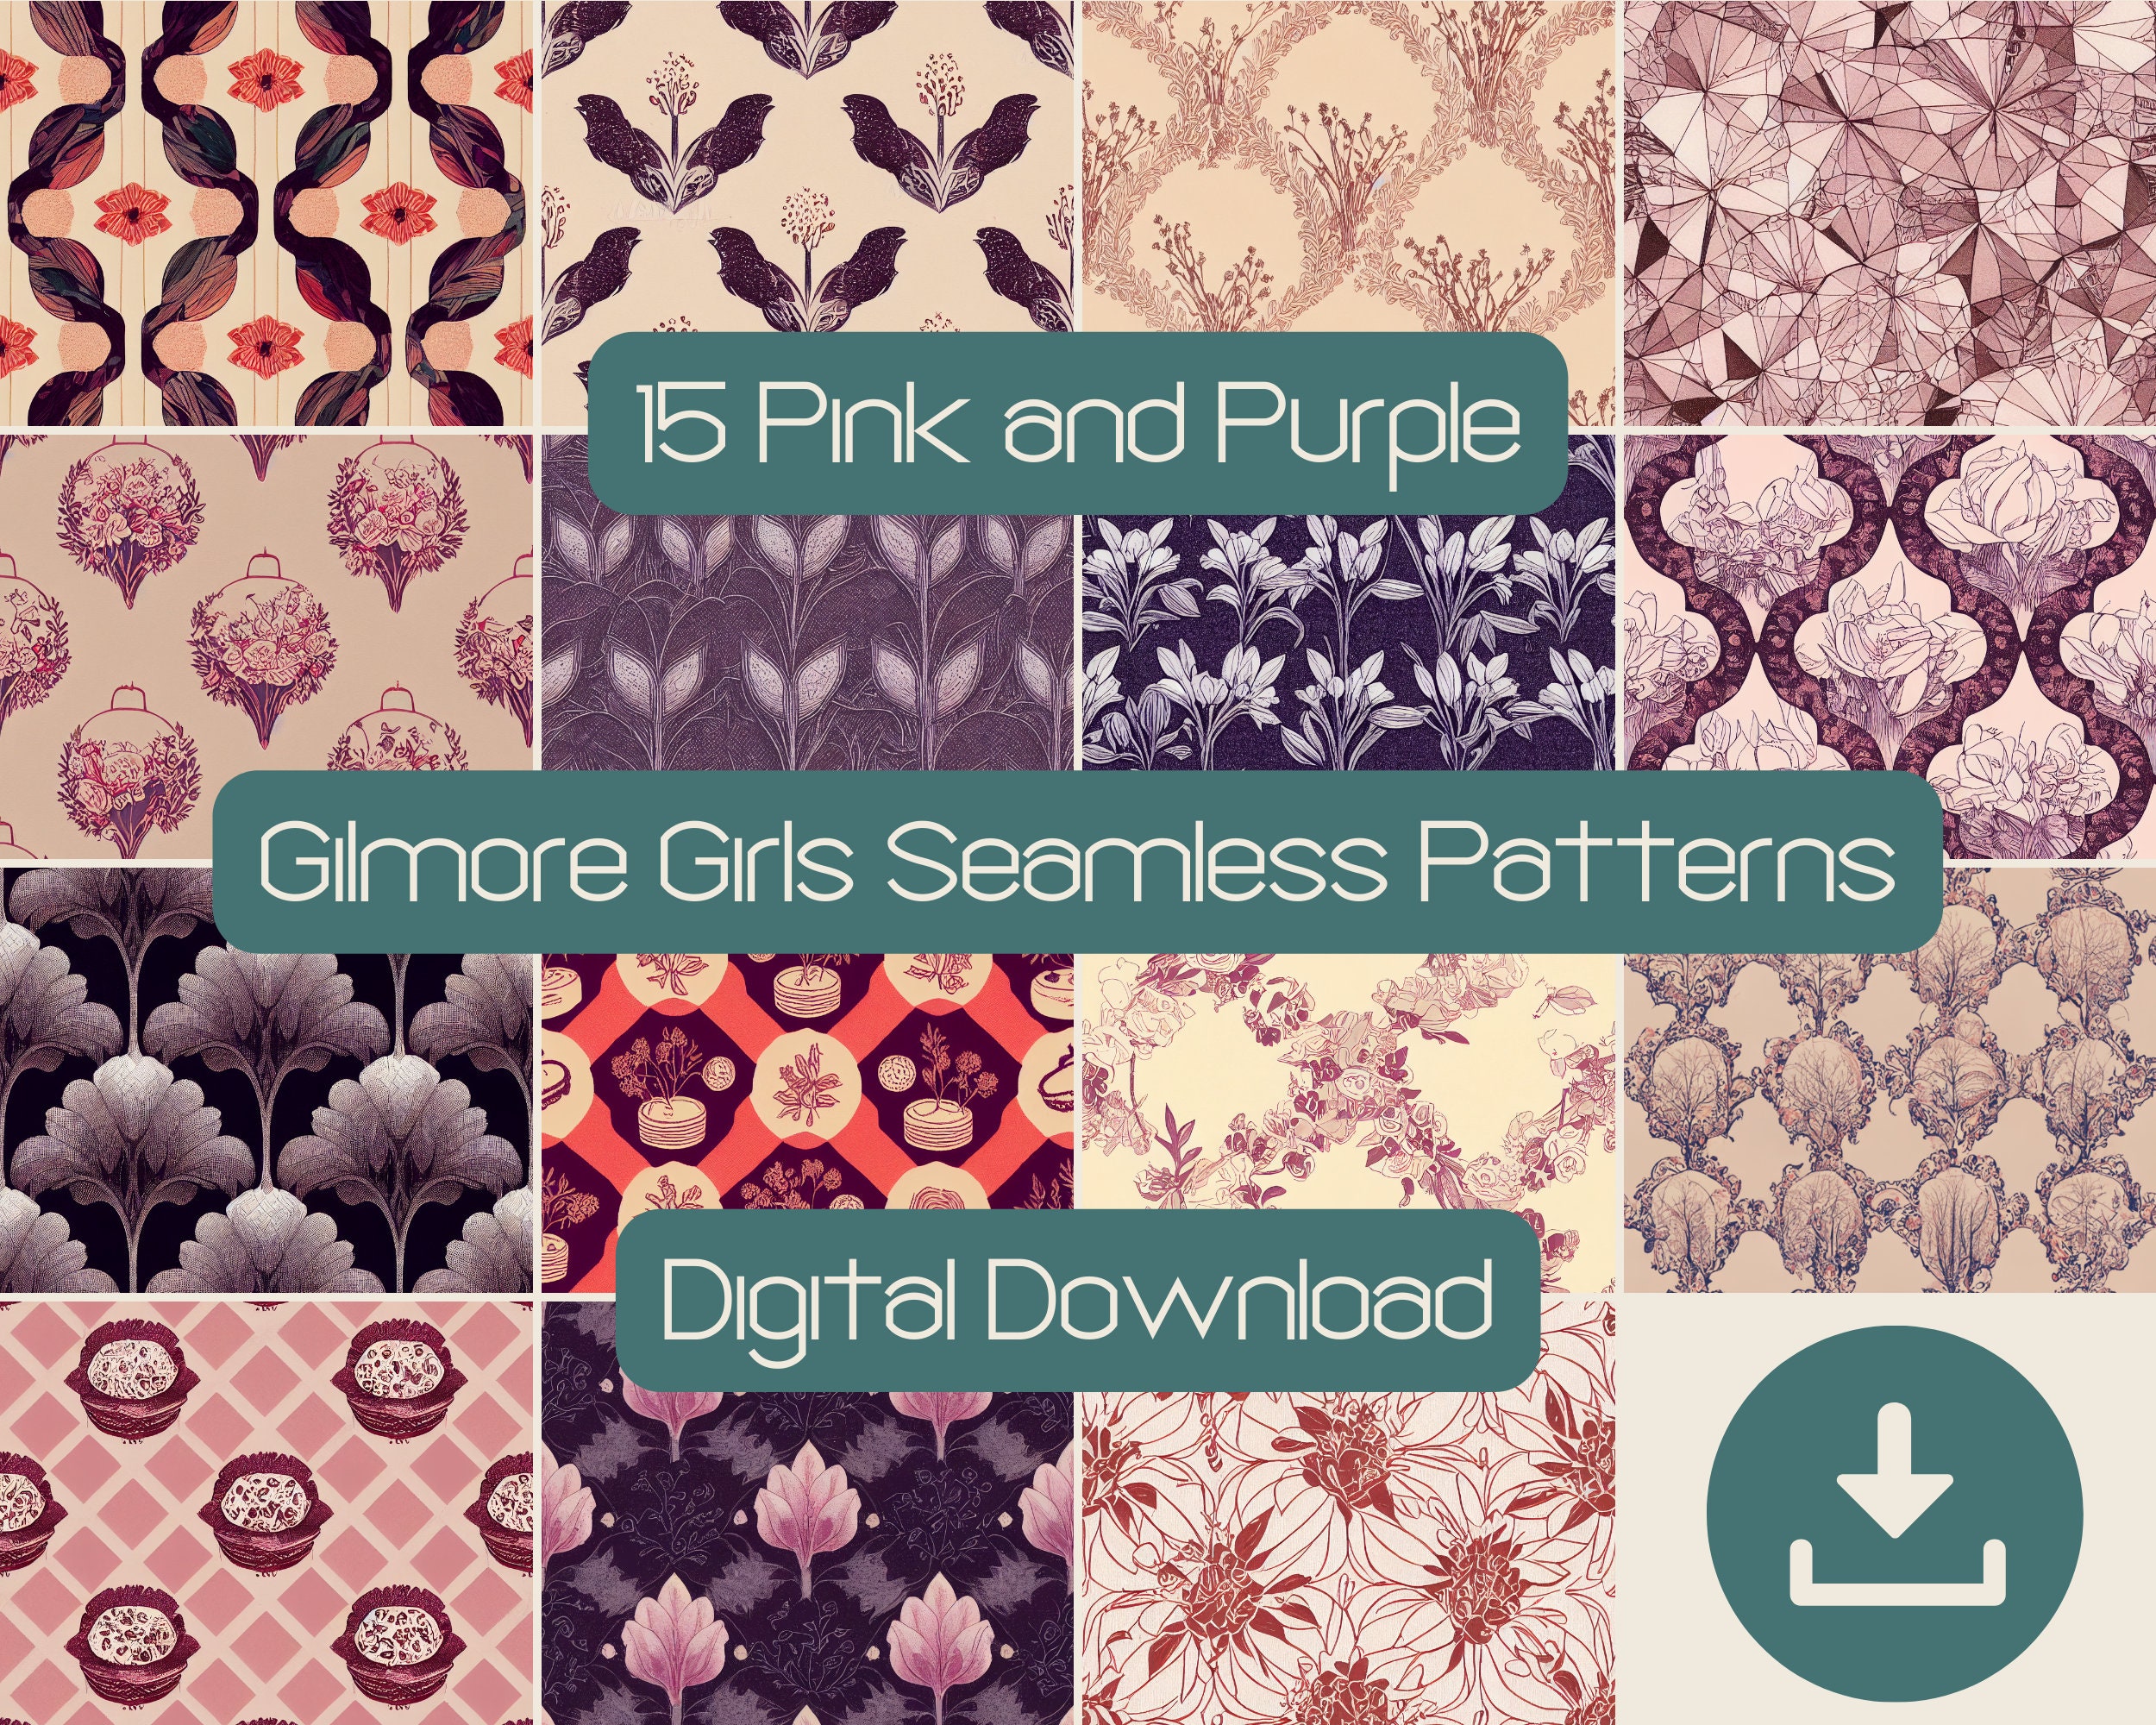 20 Gilmore Girls Themed Crafts, Recipes, Printables & More